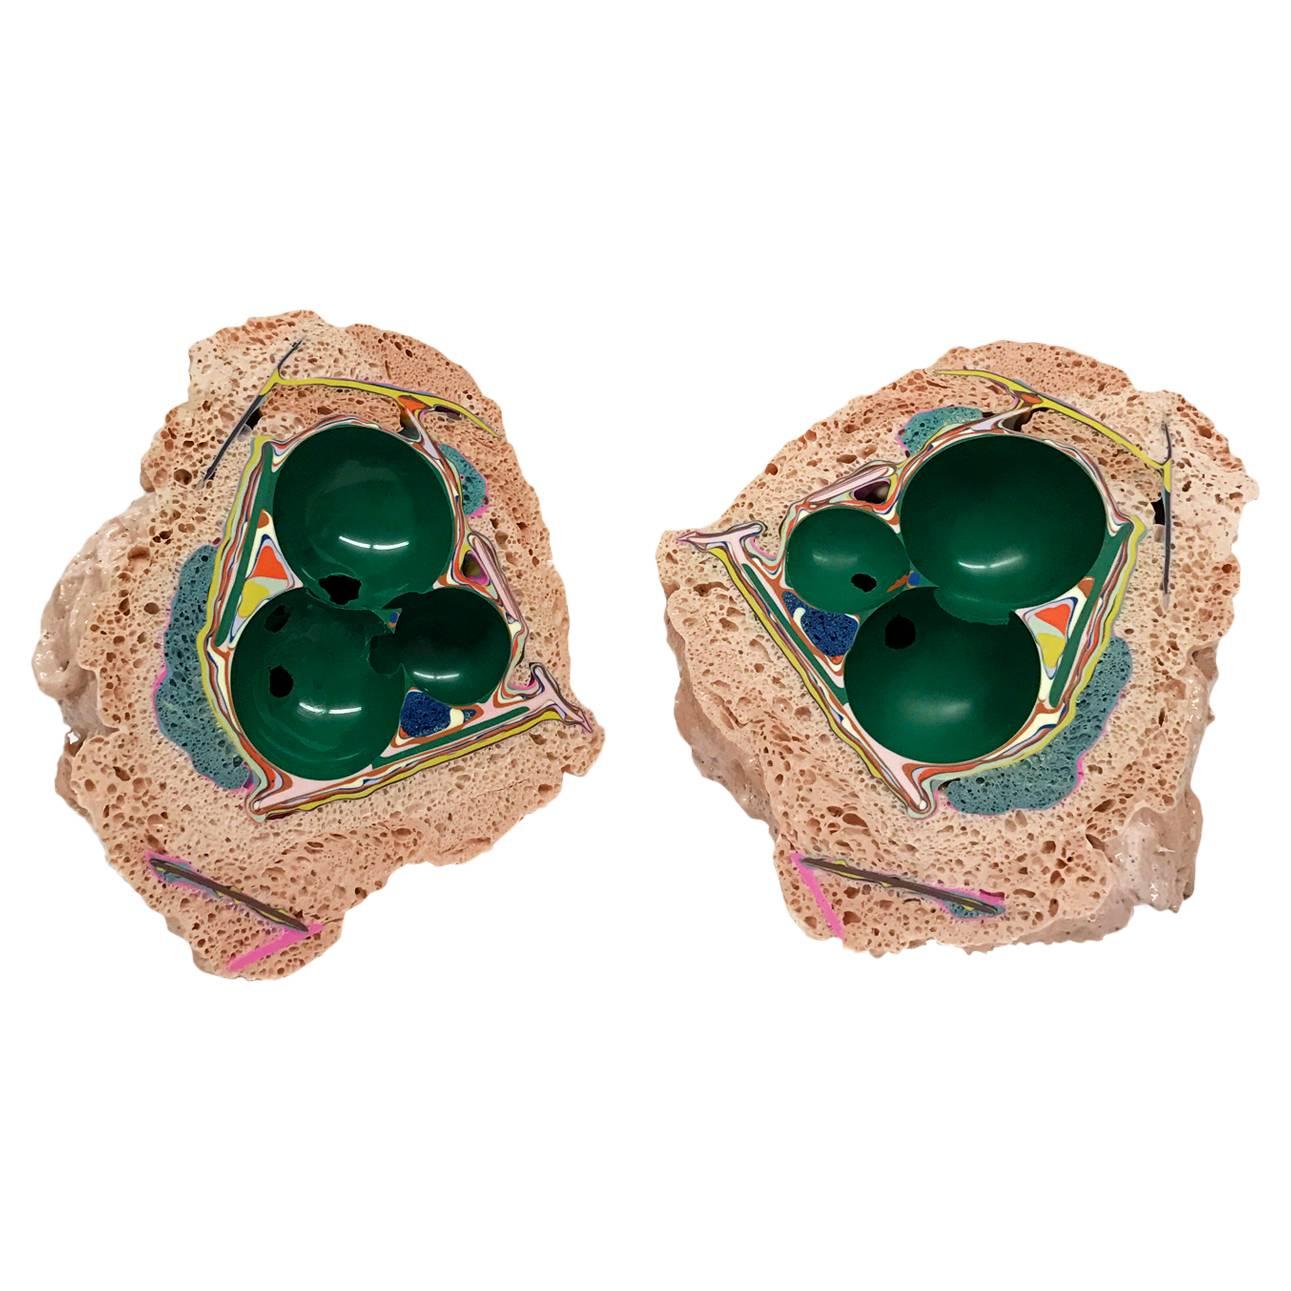 Unique Handmade Tabletop Geode Sculpture in Emerald Green and Blush Pink